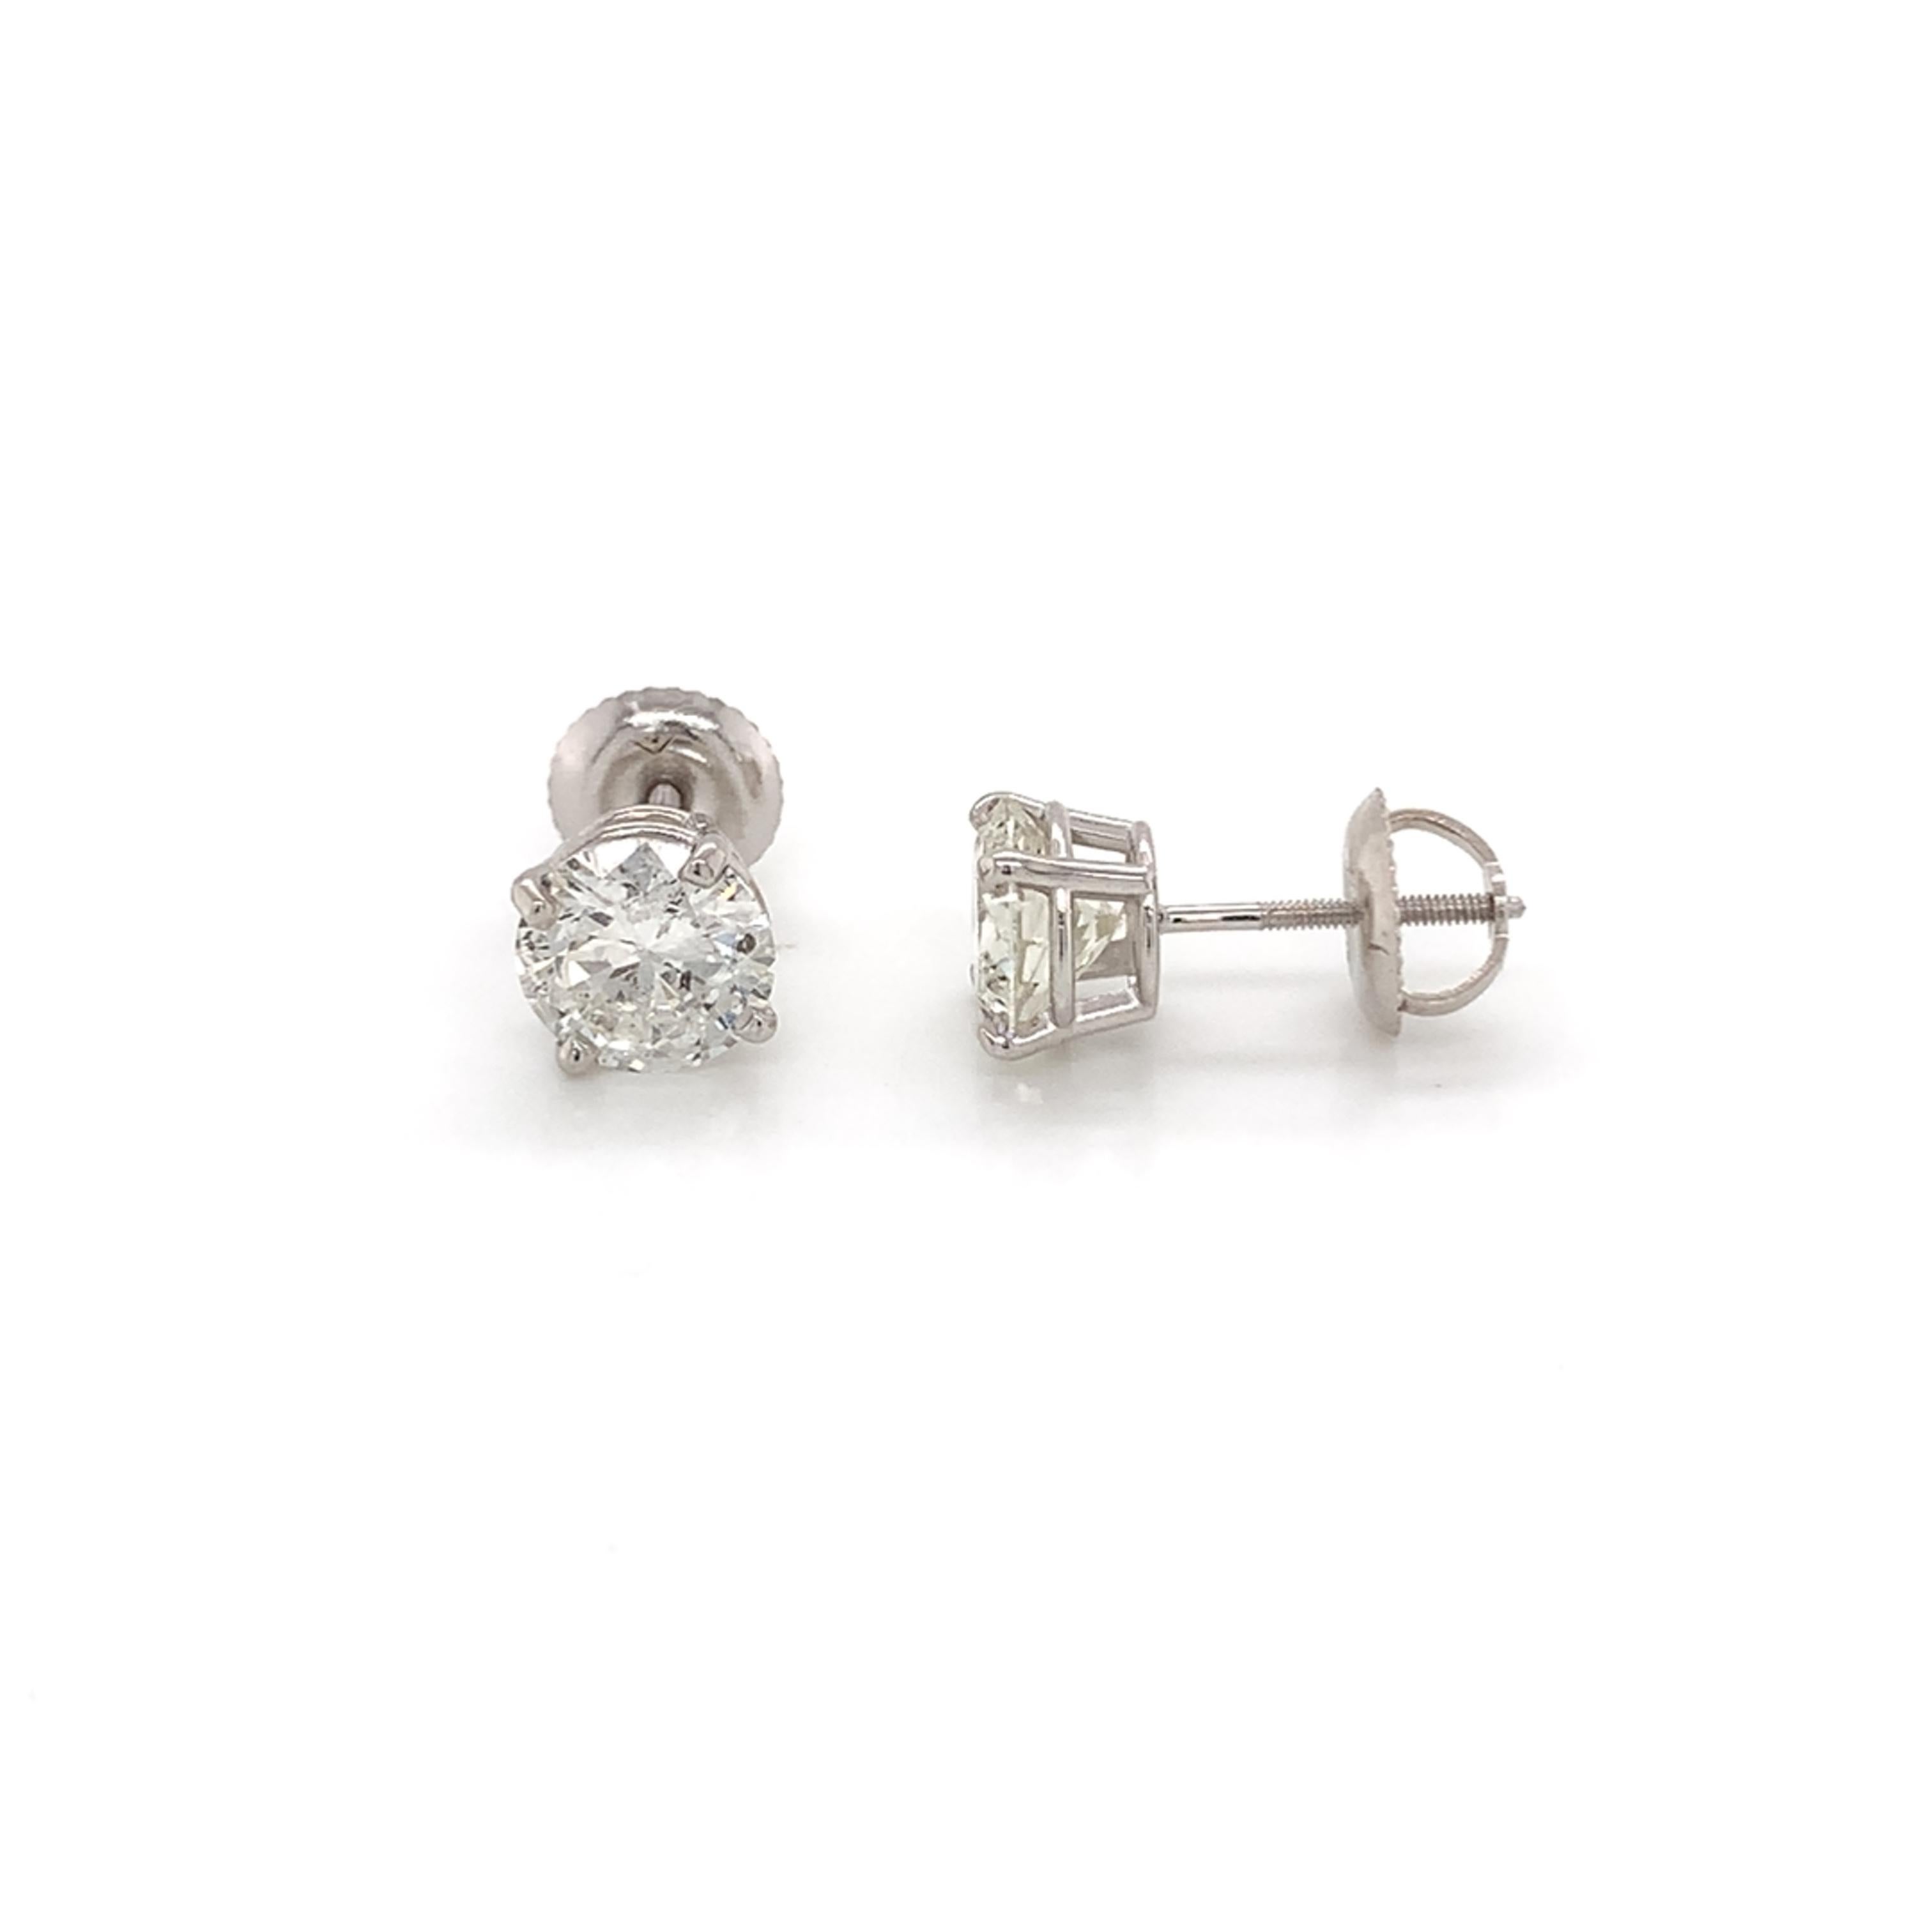 Diamond stud earrings made with real/natural brilliant cut diamonds. Total Diamond Weight: 2.04 carats. Diamond Quantity: 2 round diamonds. Color (approx): F-G. Clarity (approx): SI3-I1. Mounted on 18kt white gold, screw-back setting.